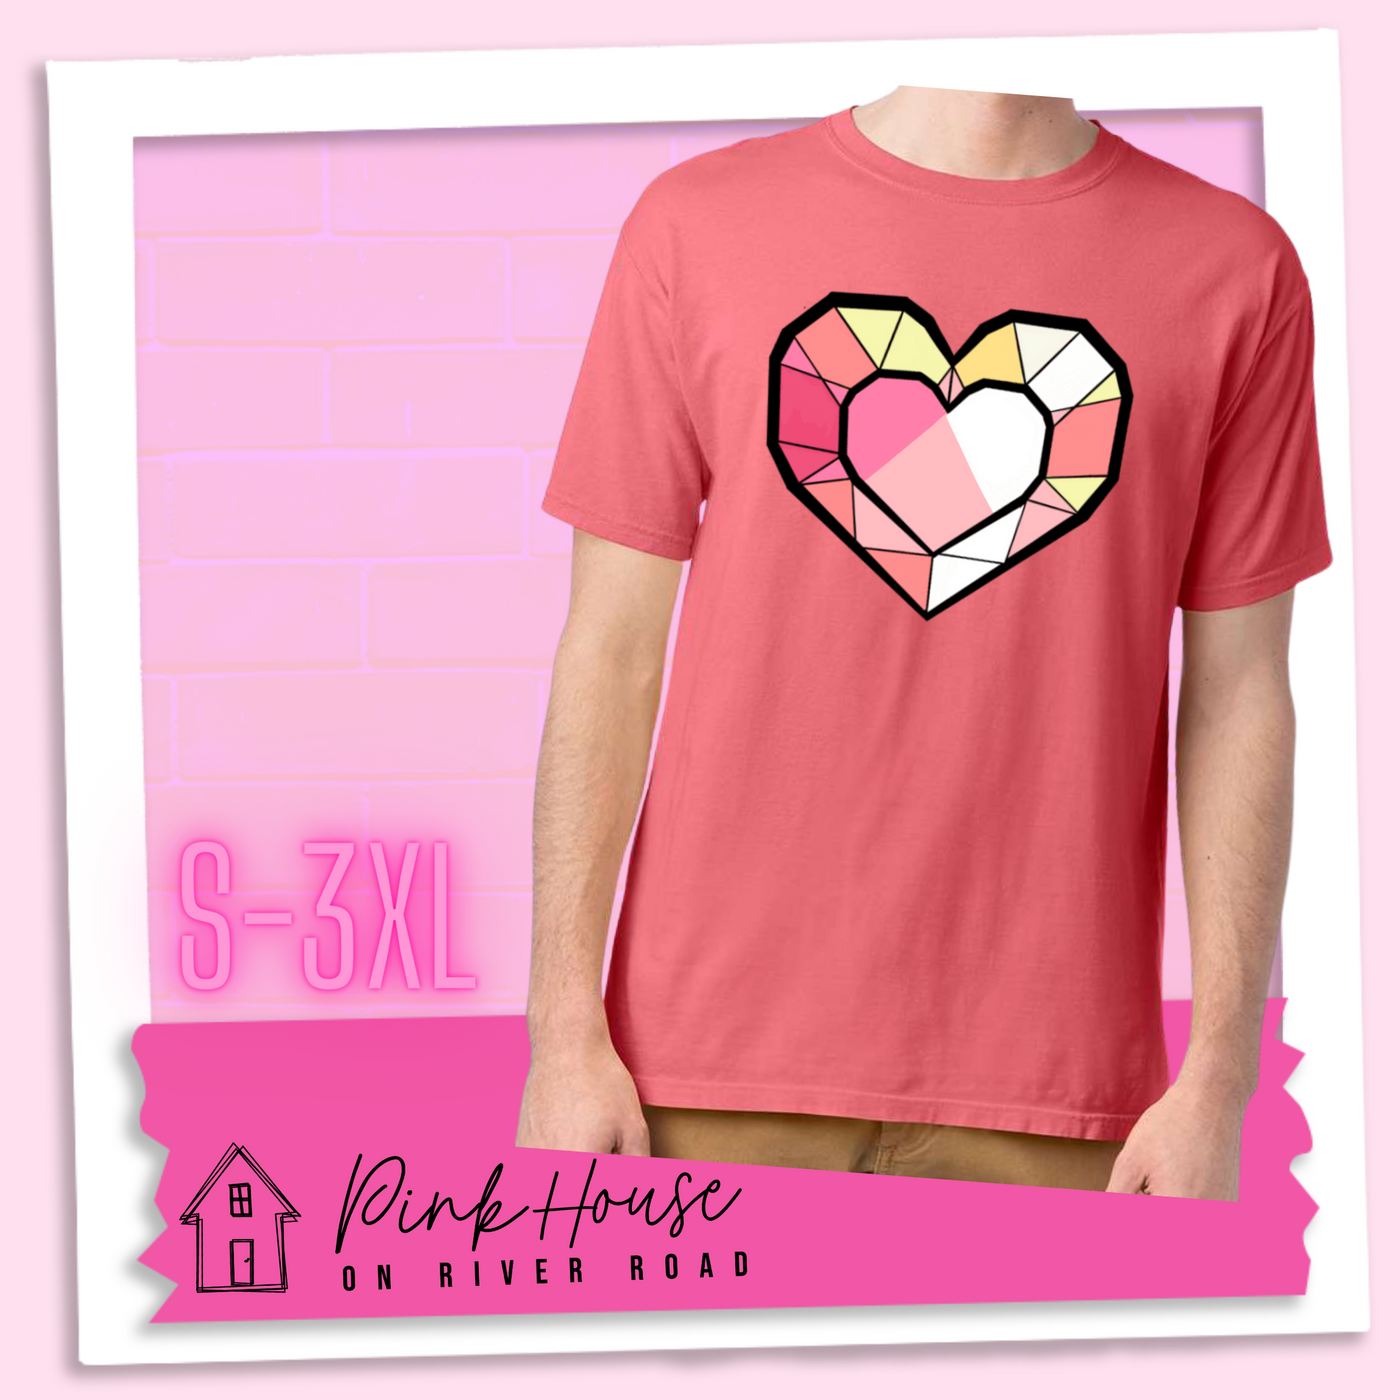 Coral graphic tee. the graphic is of a geometric heart, it has black outlines to make it look like a gem with different shades of pinks, yellows, and white.